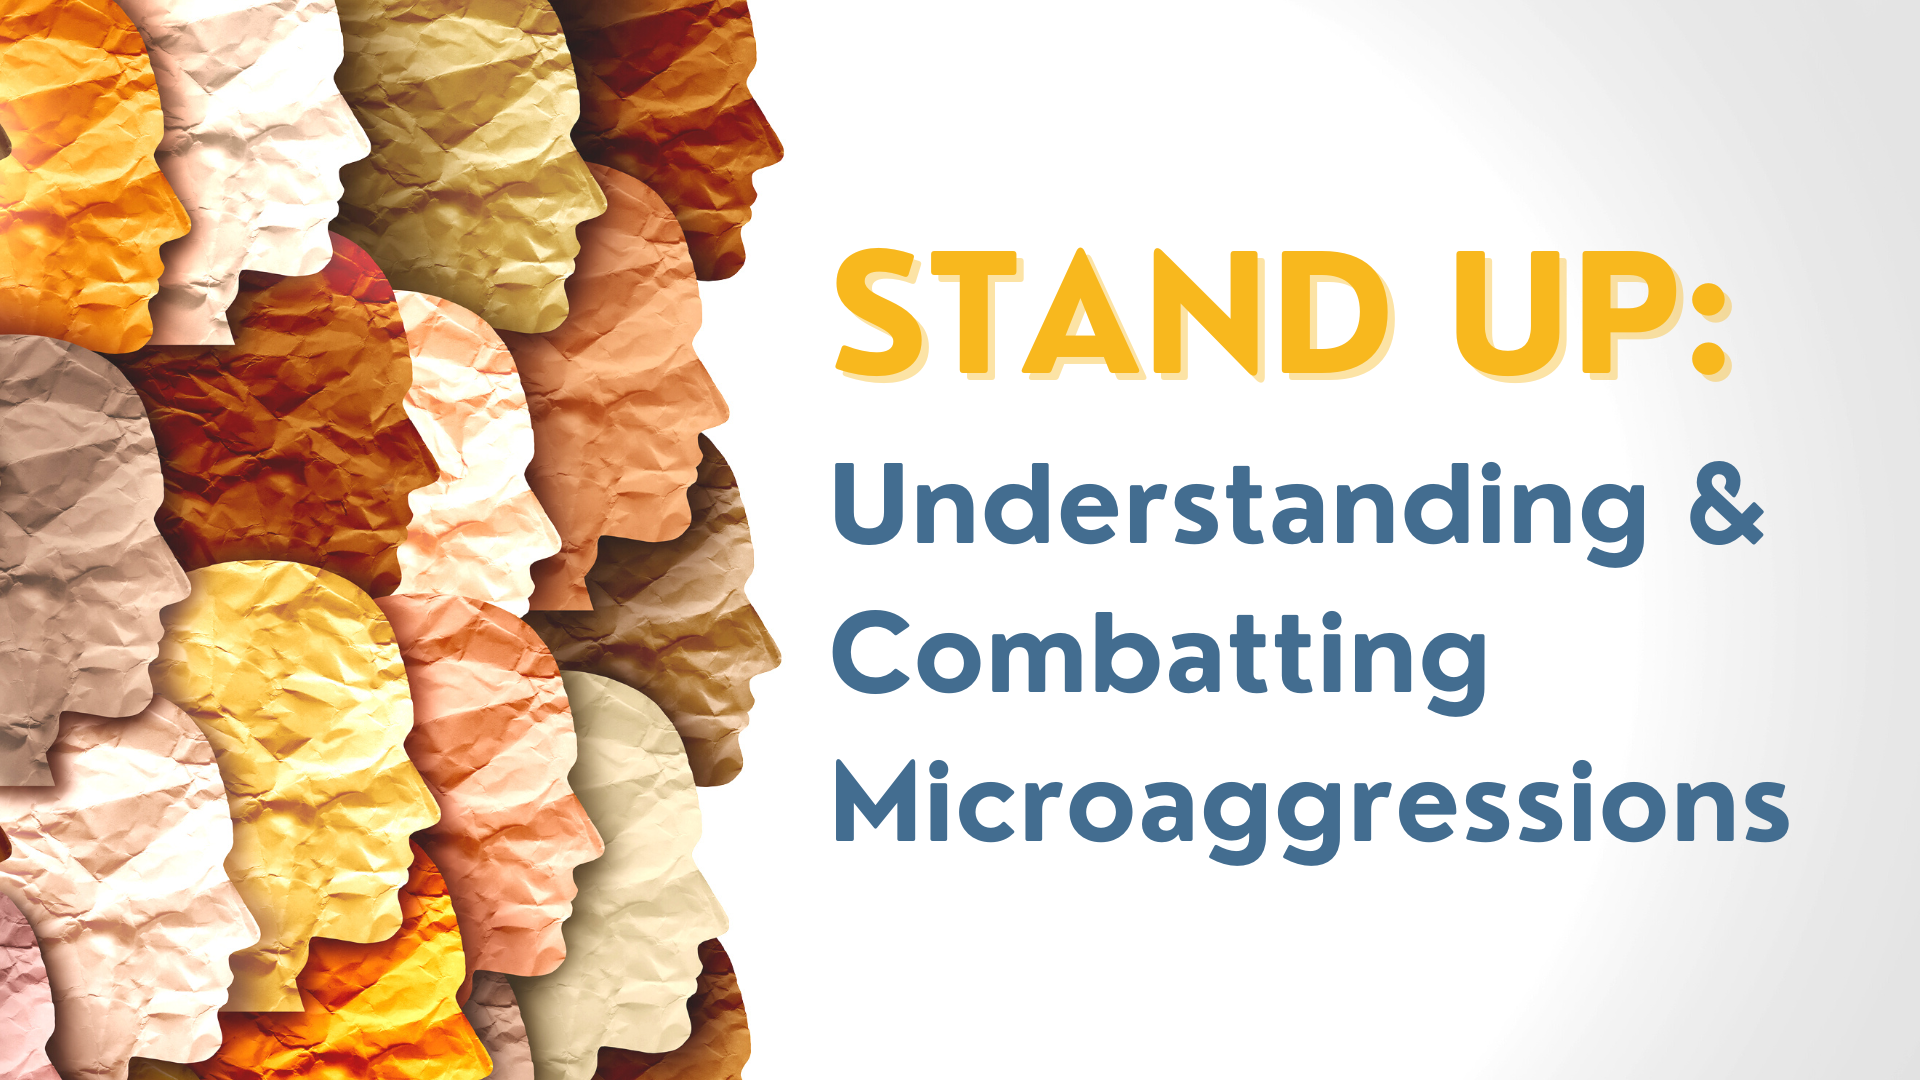 Stand Up: Understanding and Combatting Microaggressions